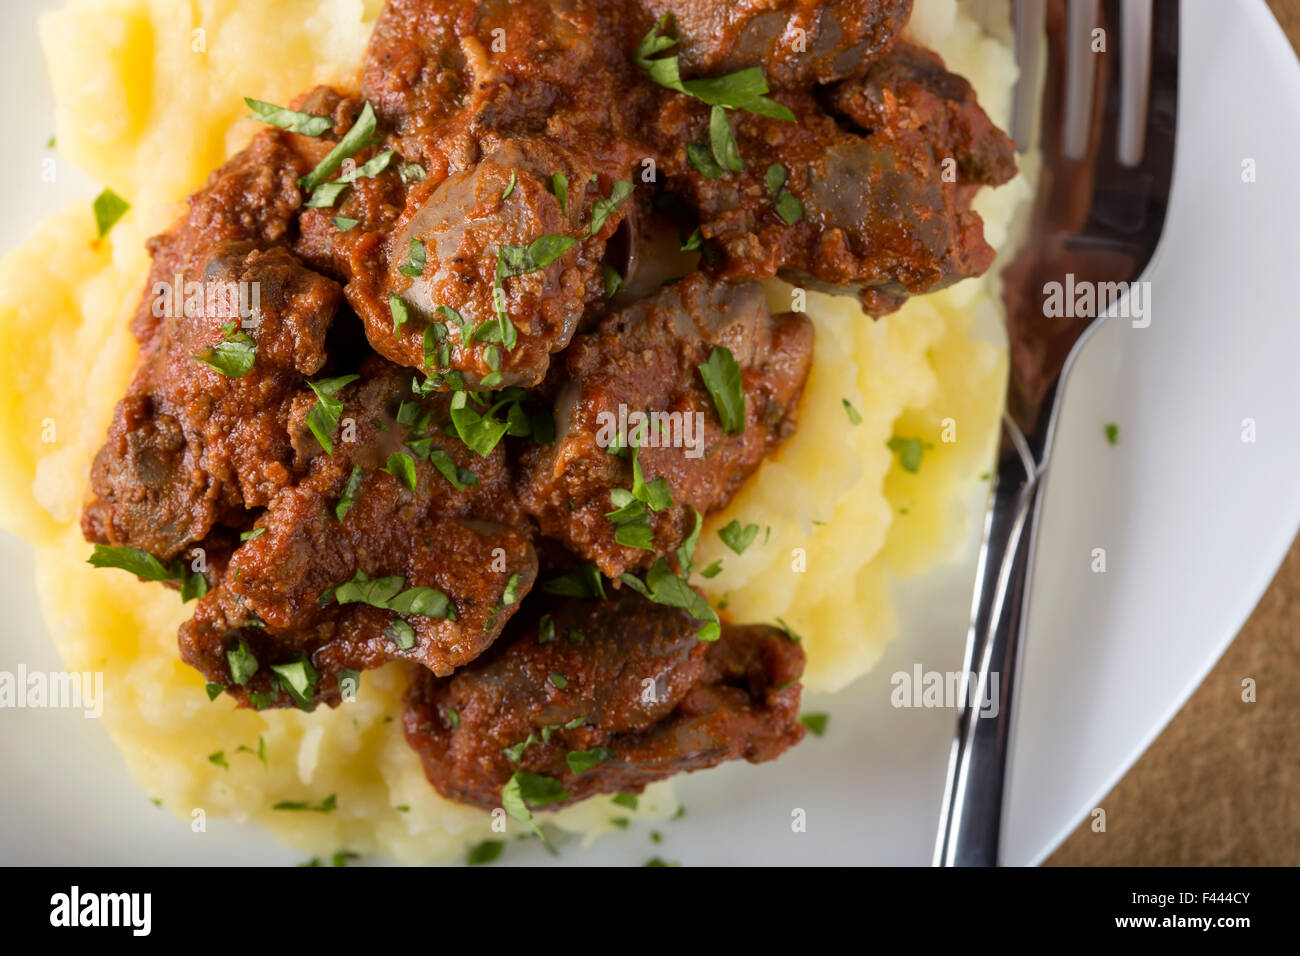 Chicken liver with tomato sauce and mashed potatoes Stock Photo